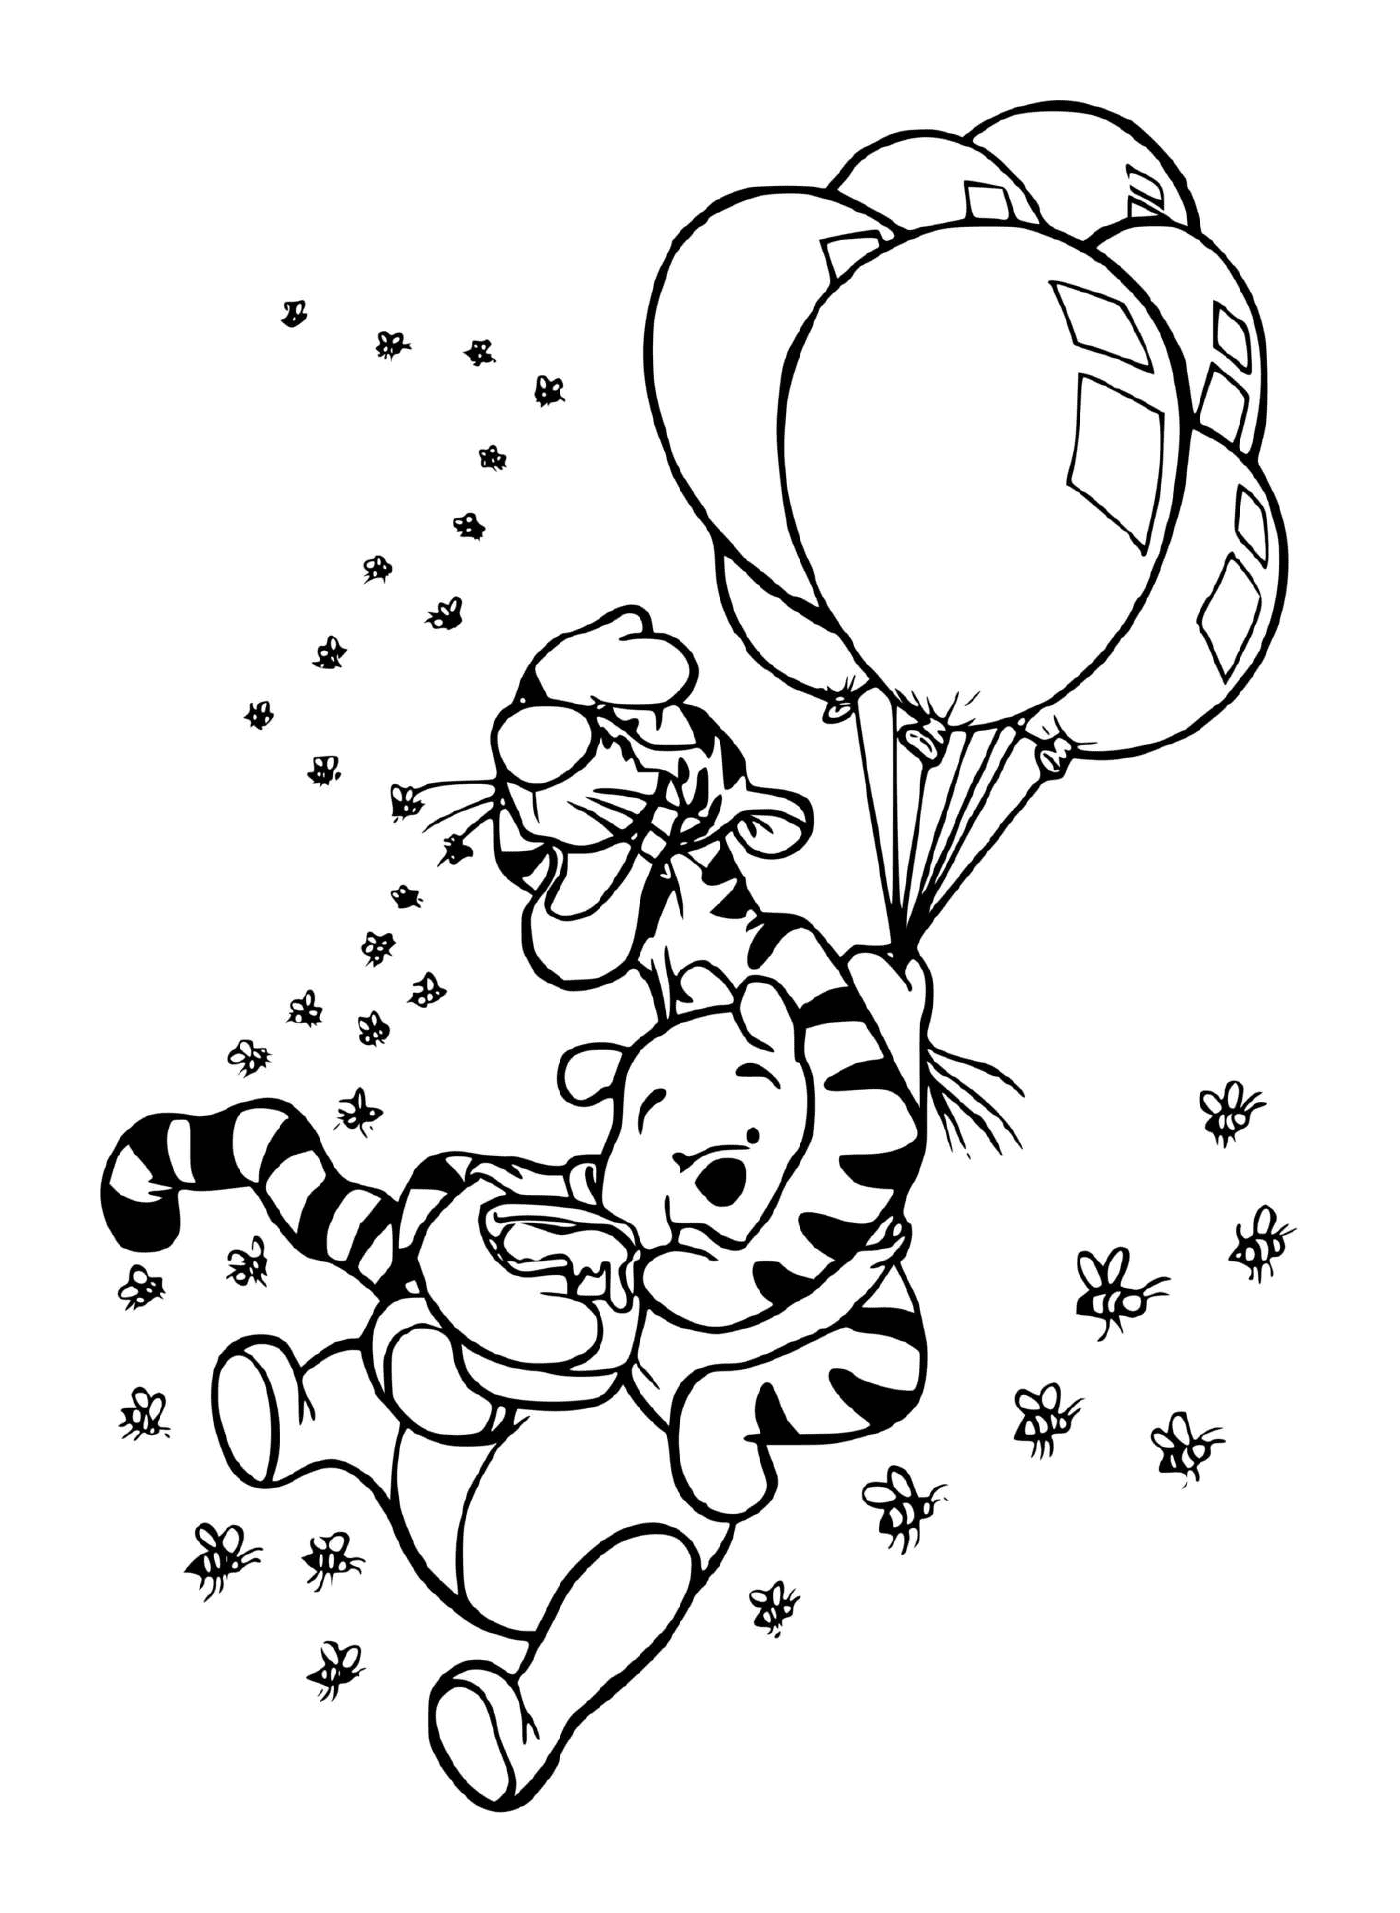  Tigrou and Winnie in the air with balloons and a pot of honey 